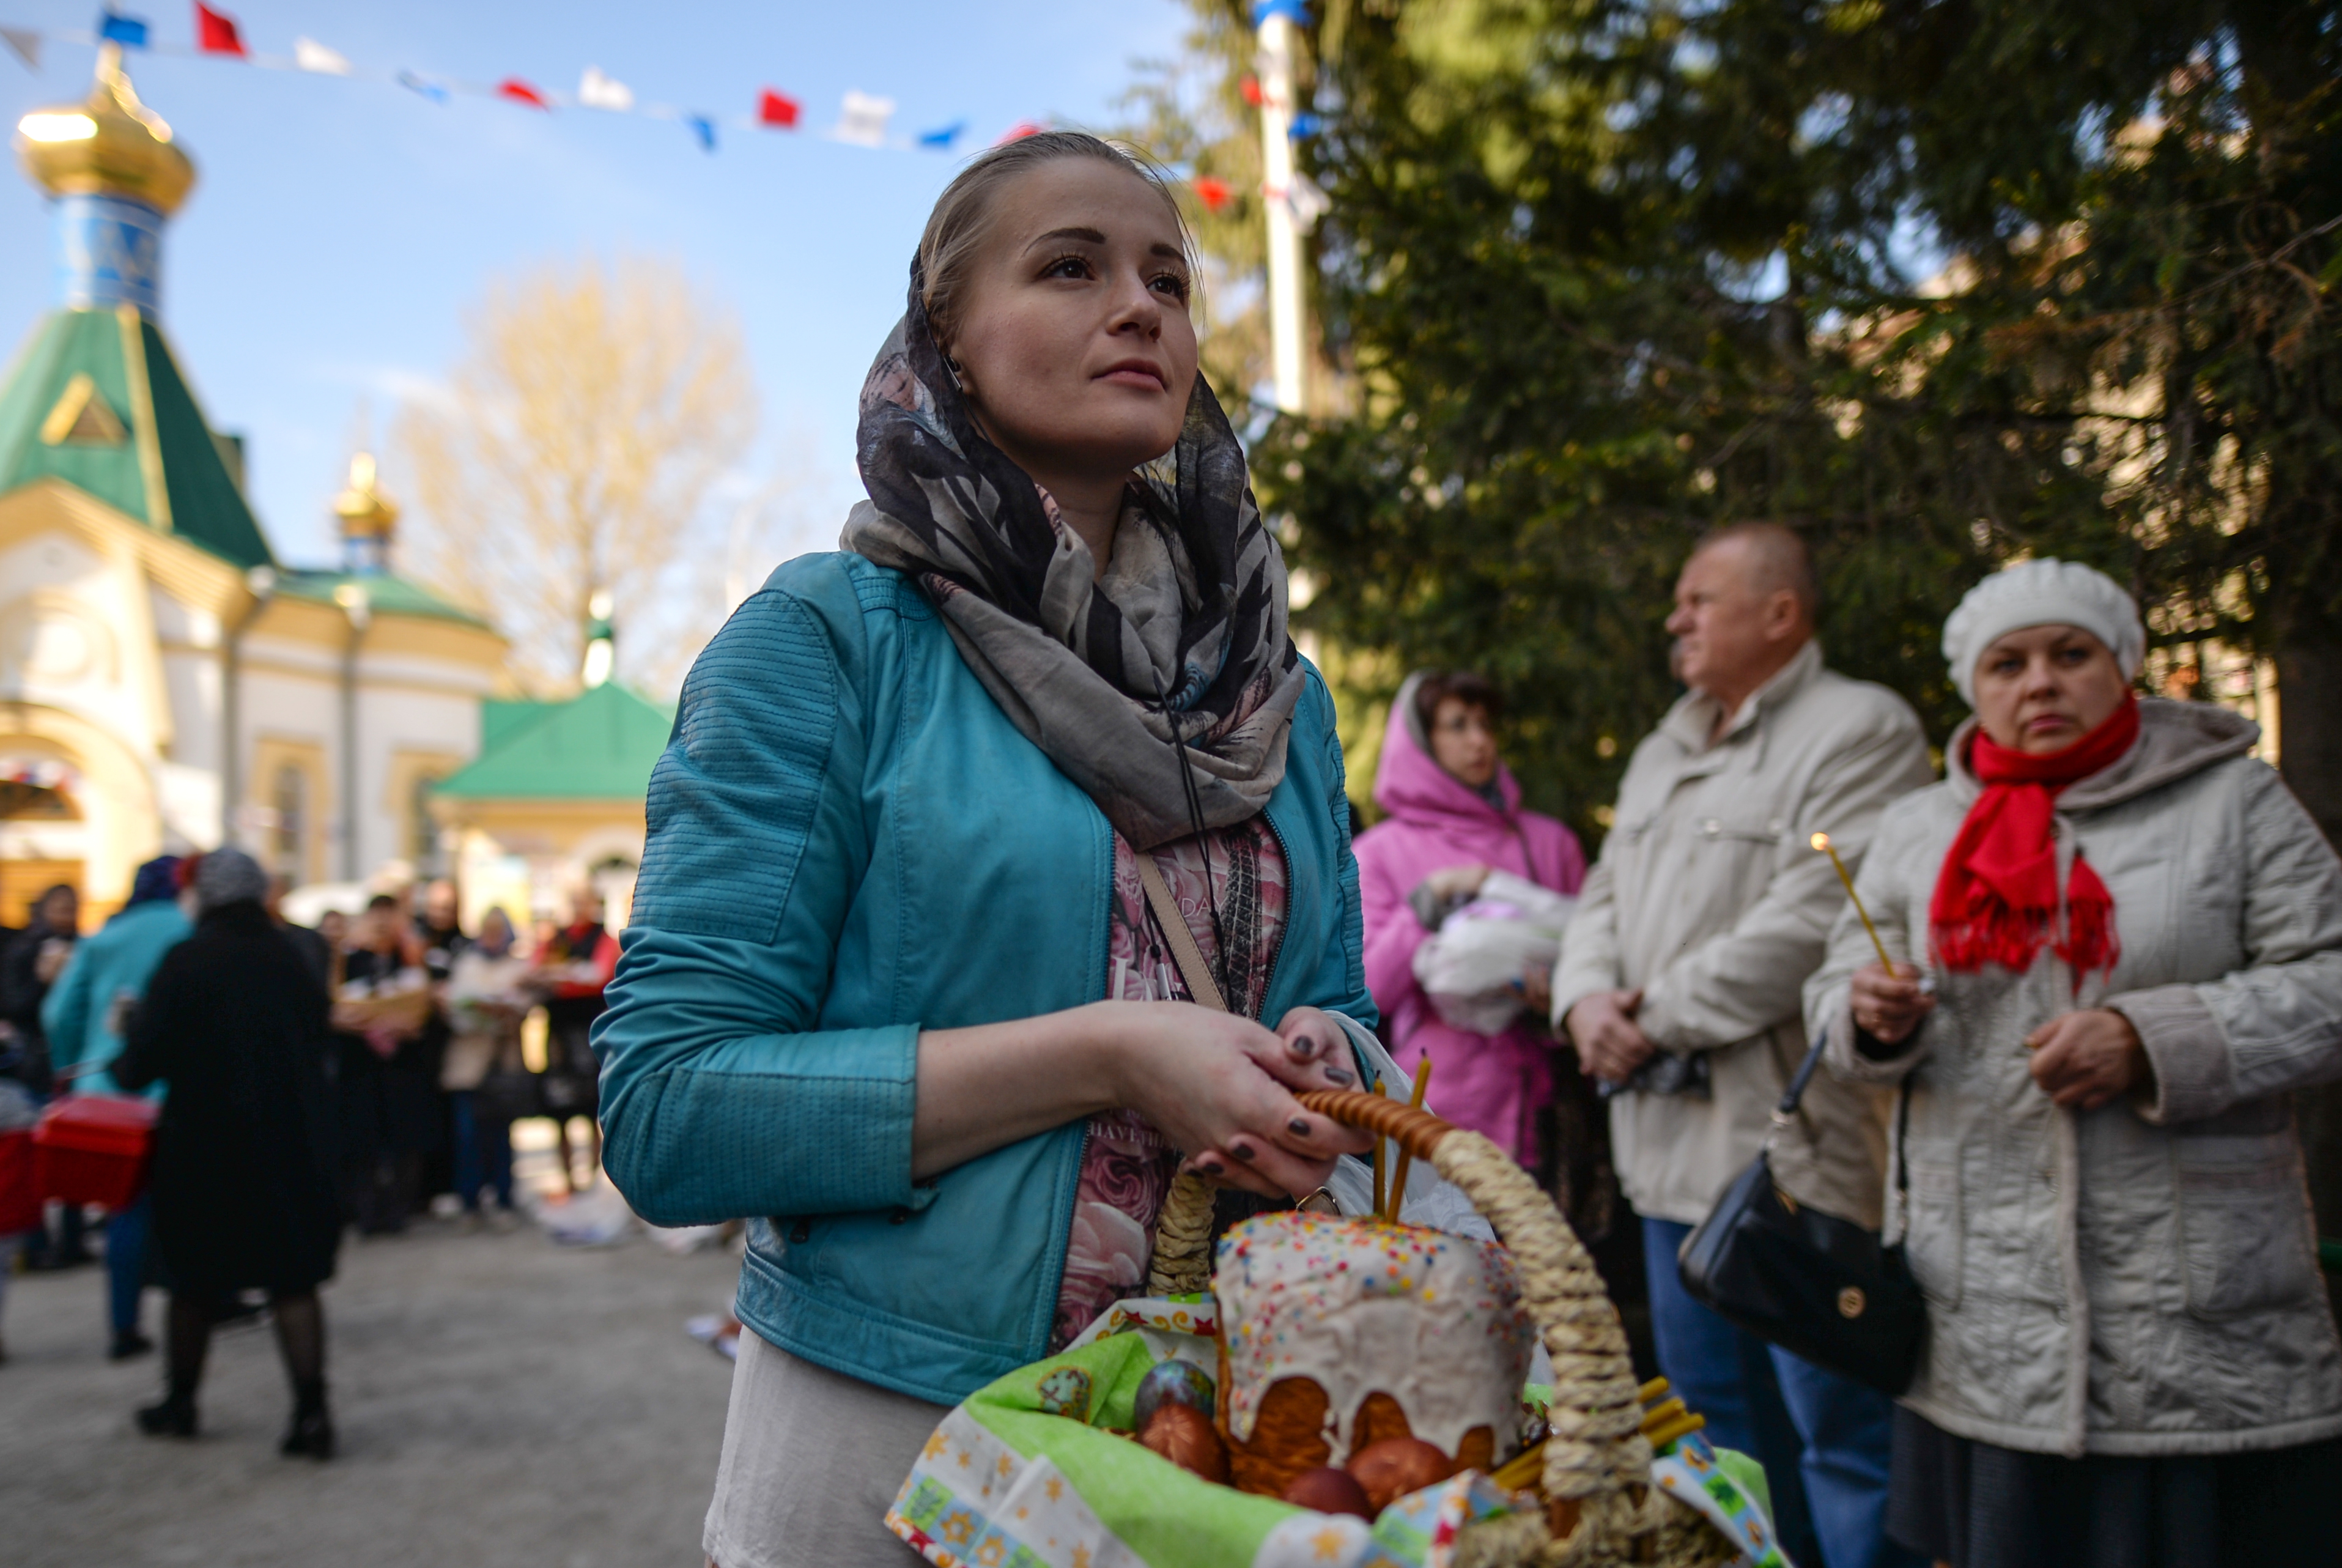 A growing number of young Russians find religion appealing. Source: Alexandr Kryazhev/RIA Novosti